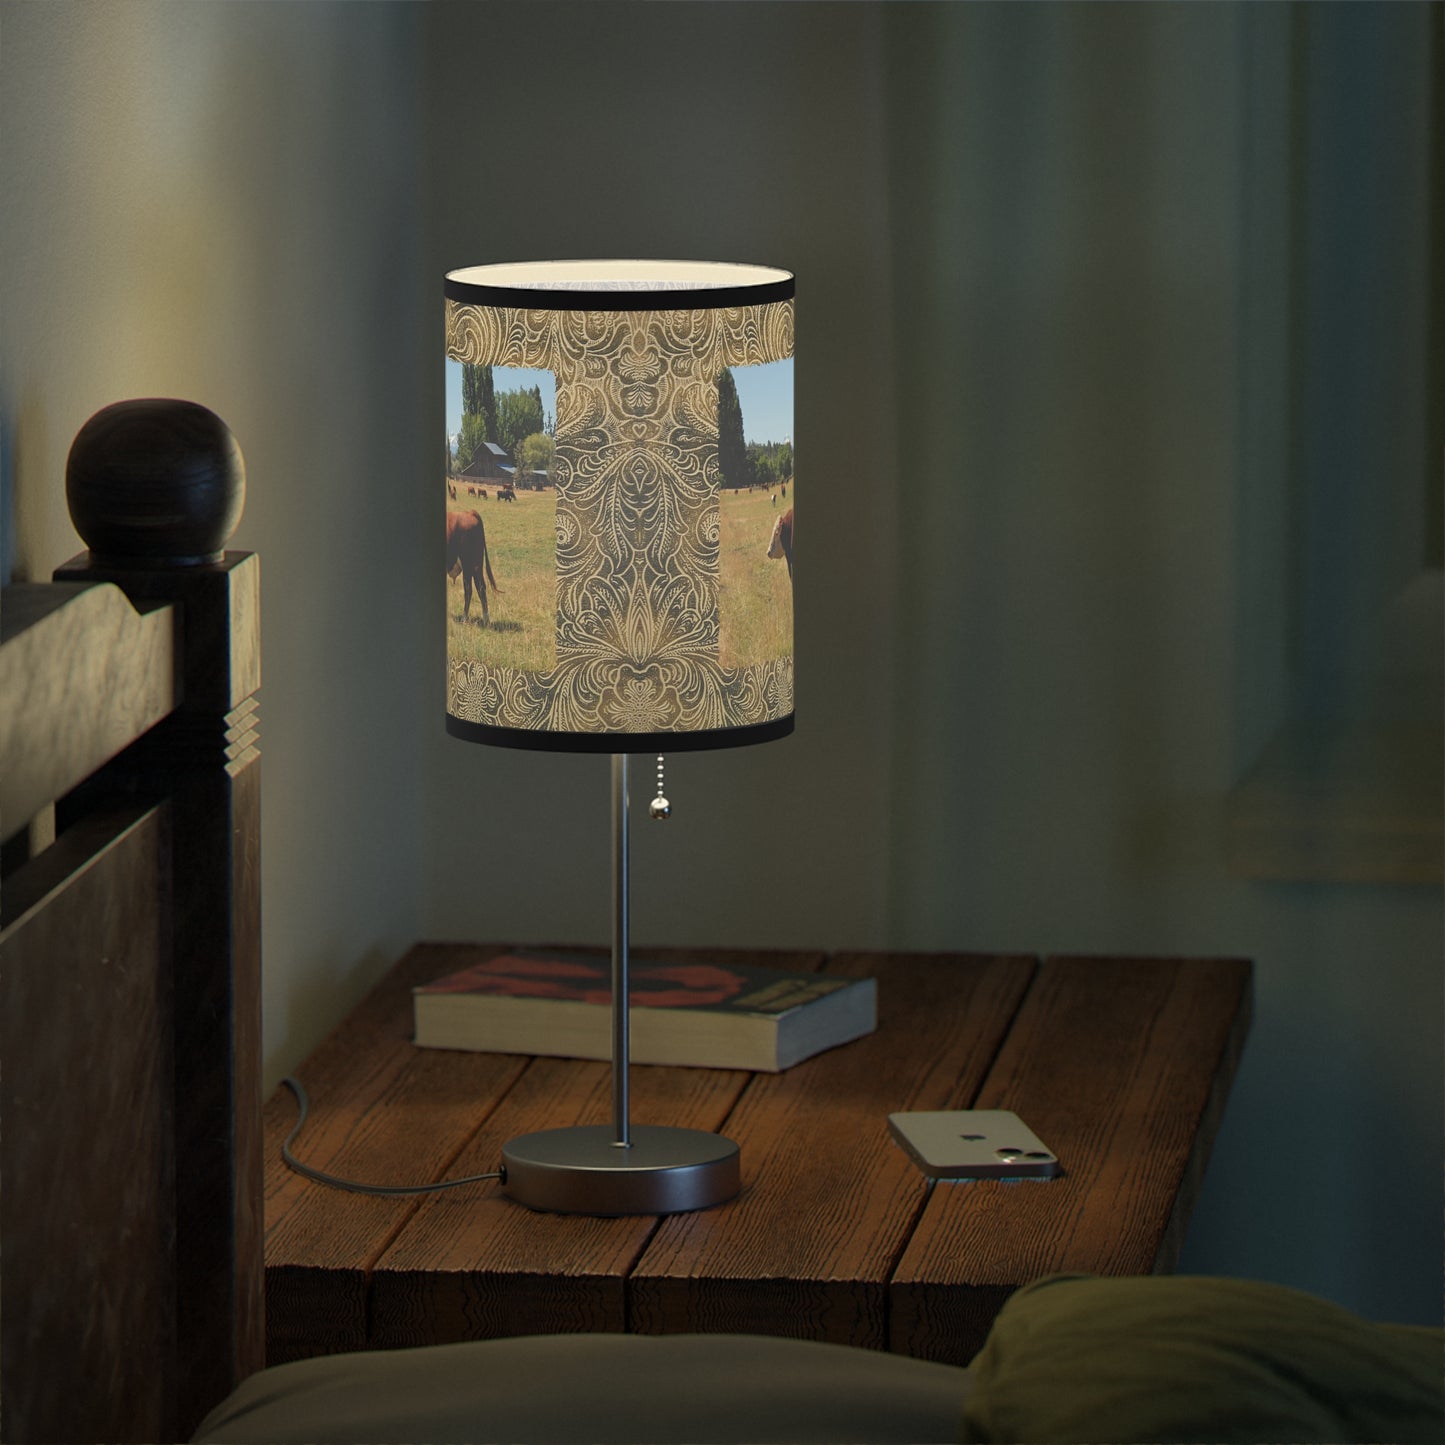 King Of The Pasture Lamp on a Stand